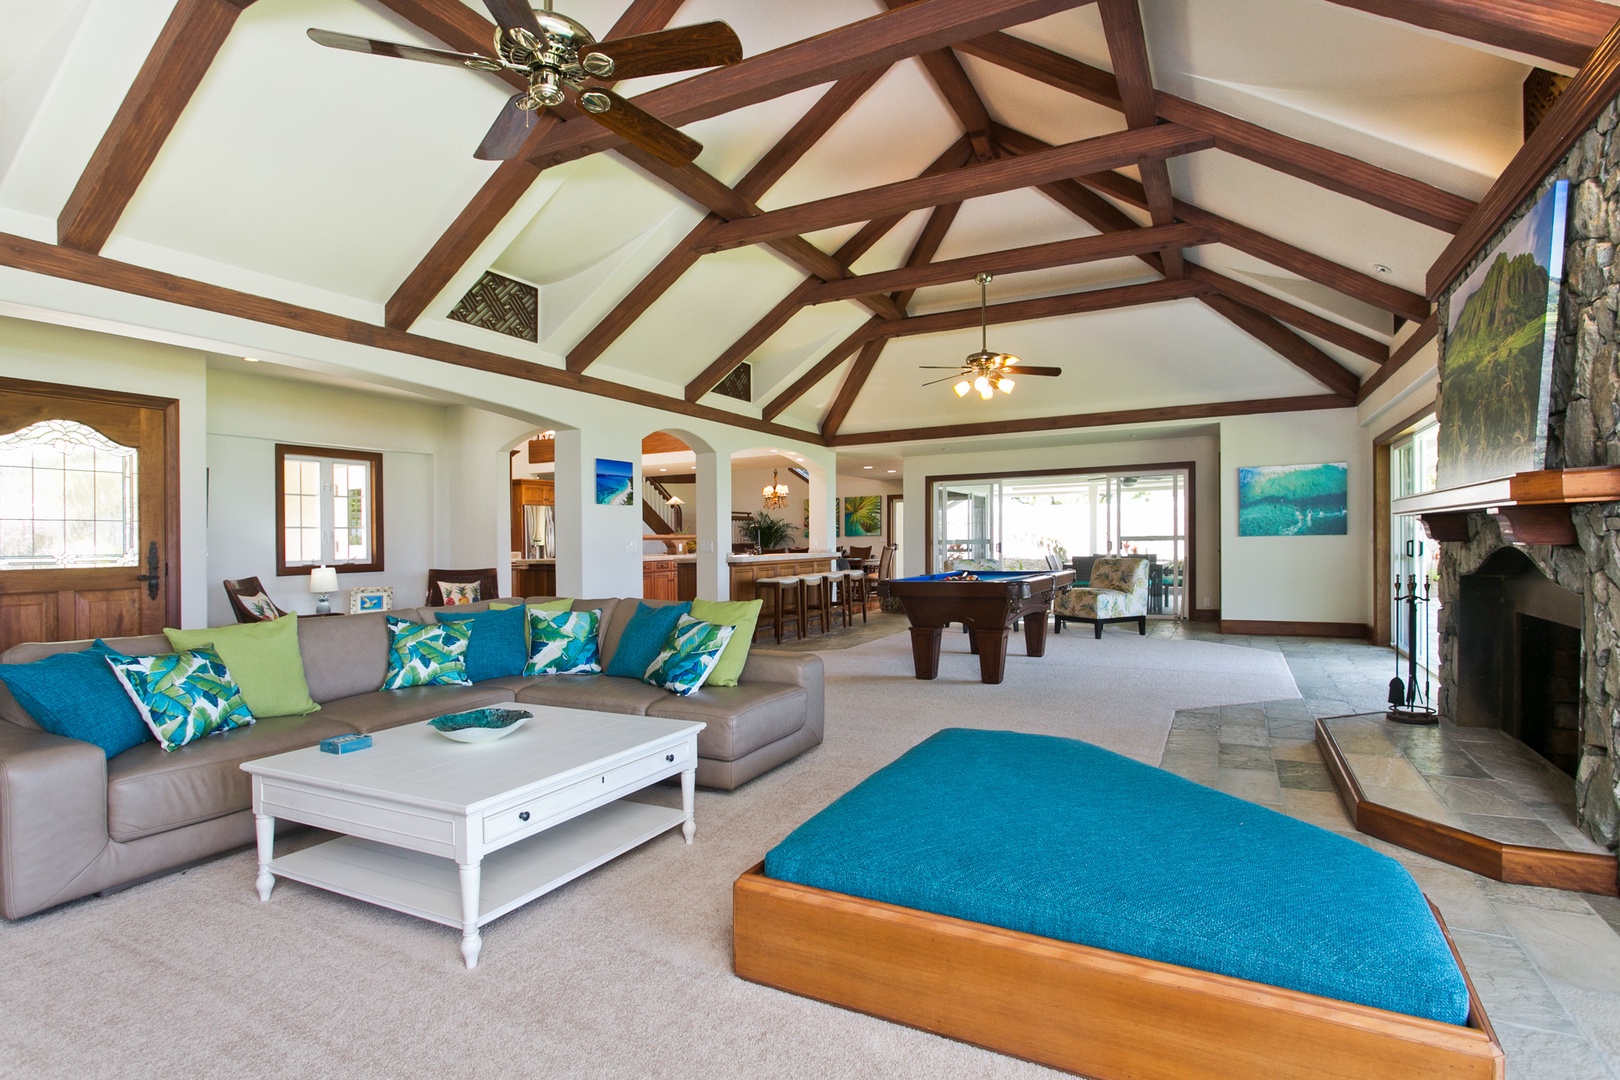 Kailua Vacation Rentals, Lanikai Village* - Hale Melia: Spacious living area right next to a game of pool table, a nice venue for fun family time.